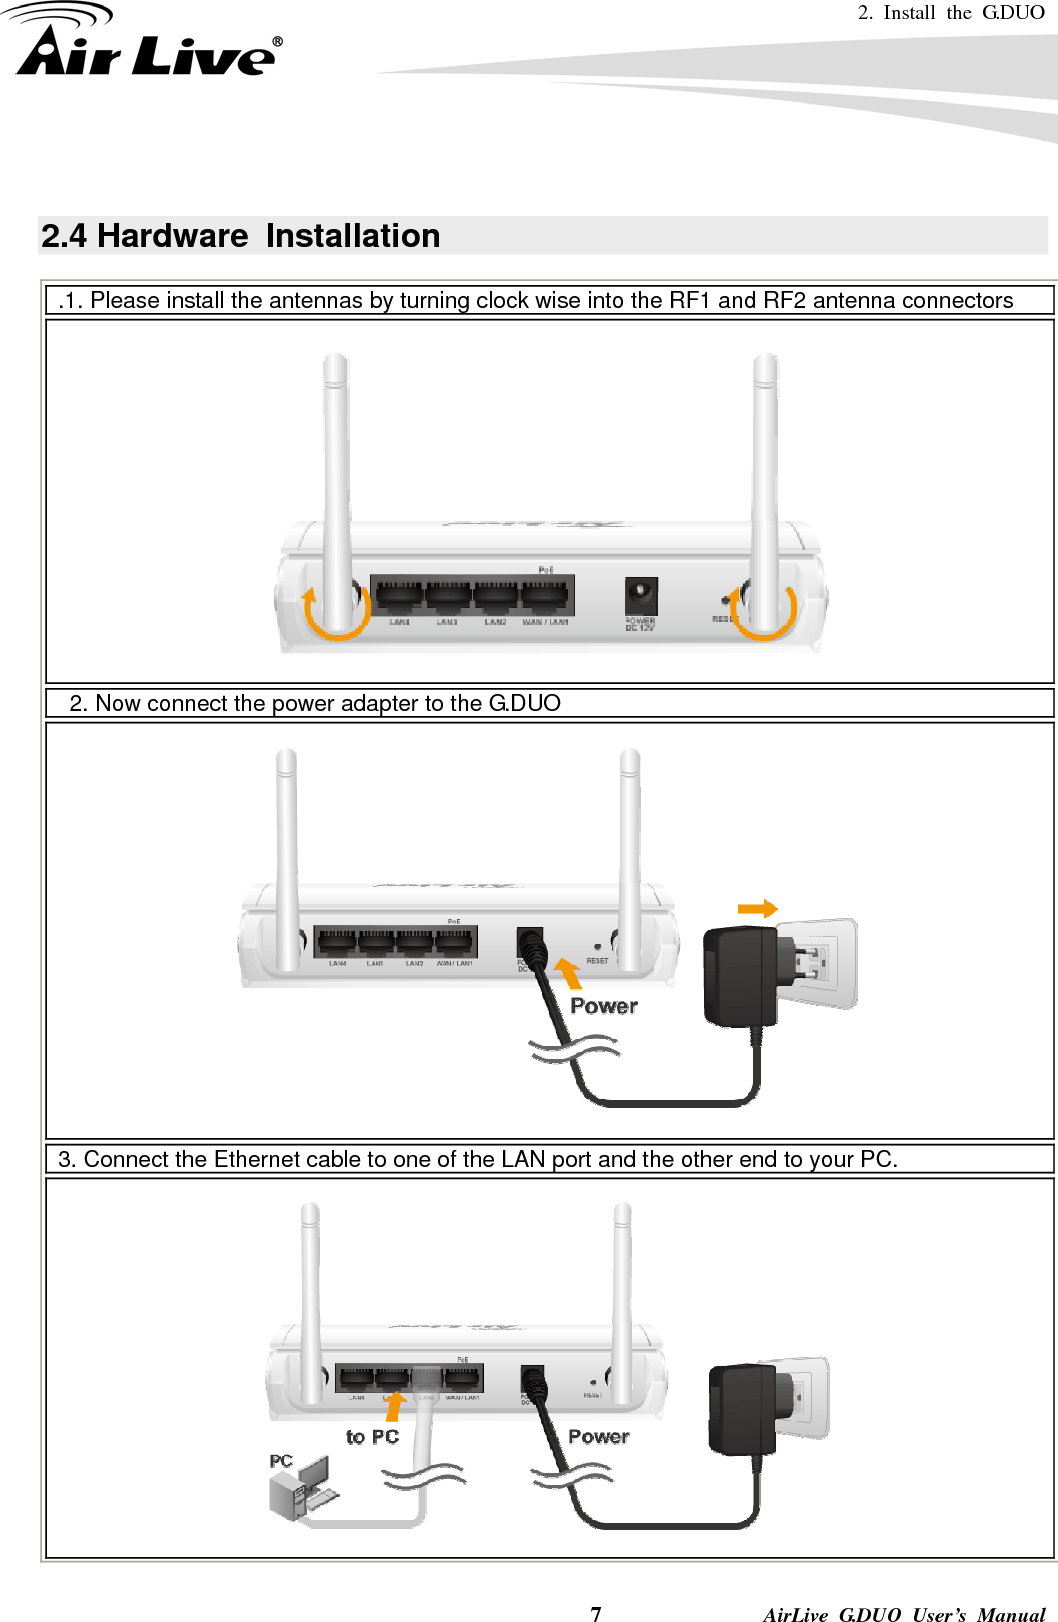 2. Install the G.DUO   7              AirLive G.DUO User’s Manual    2.4 Hardware  Installation   .1. Please install the antennas by turning clock wise into the RF1 and RF2 antenna connectors  2. Now connect the power adapter to the G.DUO  3. Connect the Ethernet cable to one of the LAN port and the other end to your PC.  